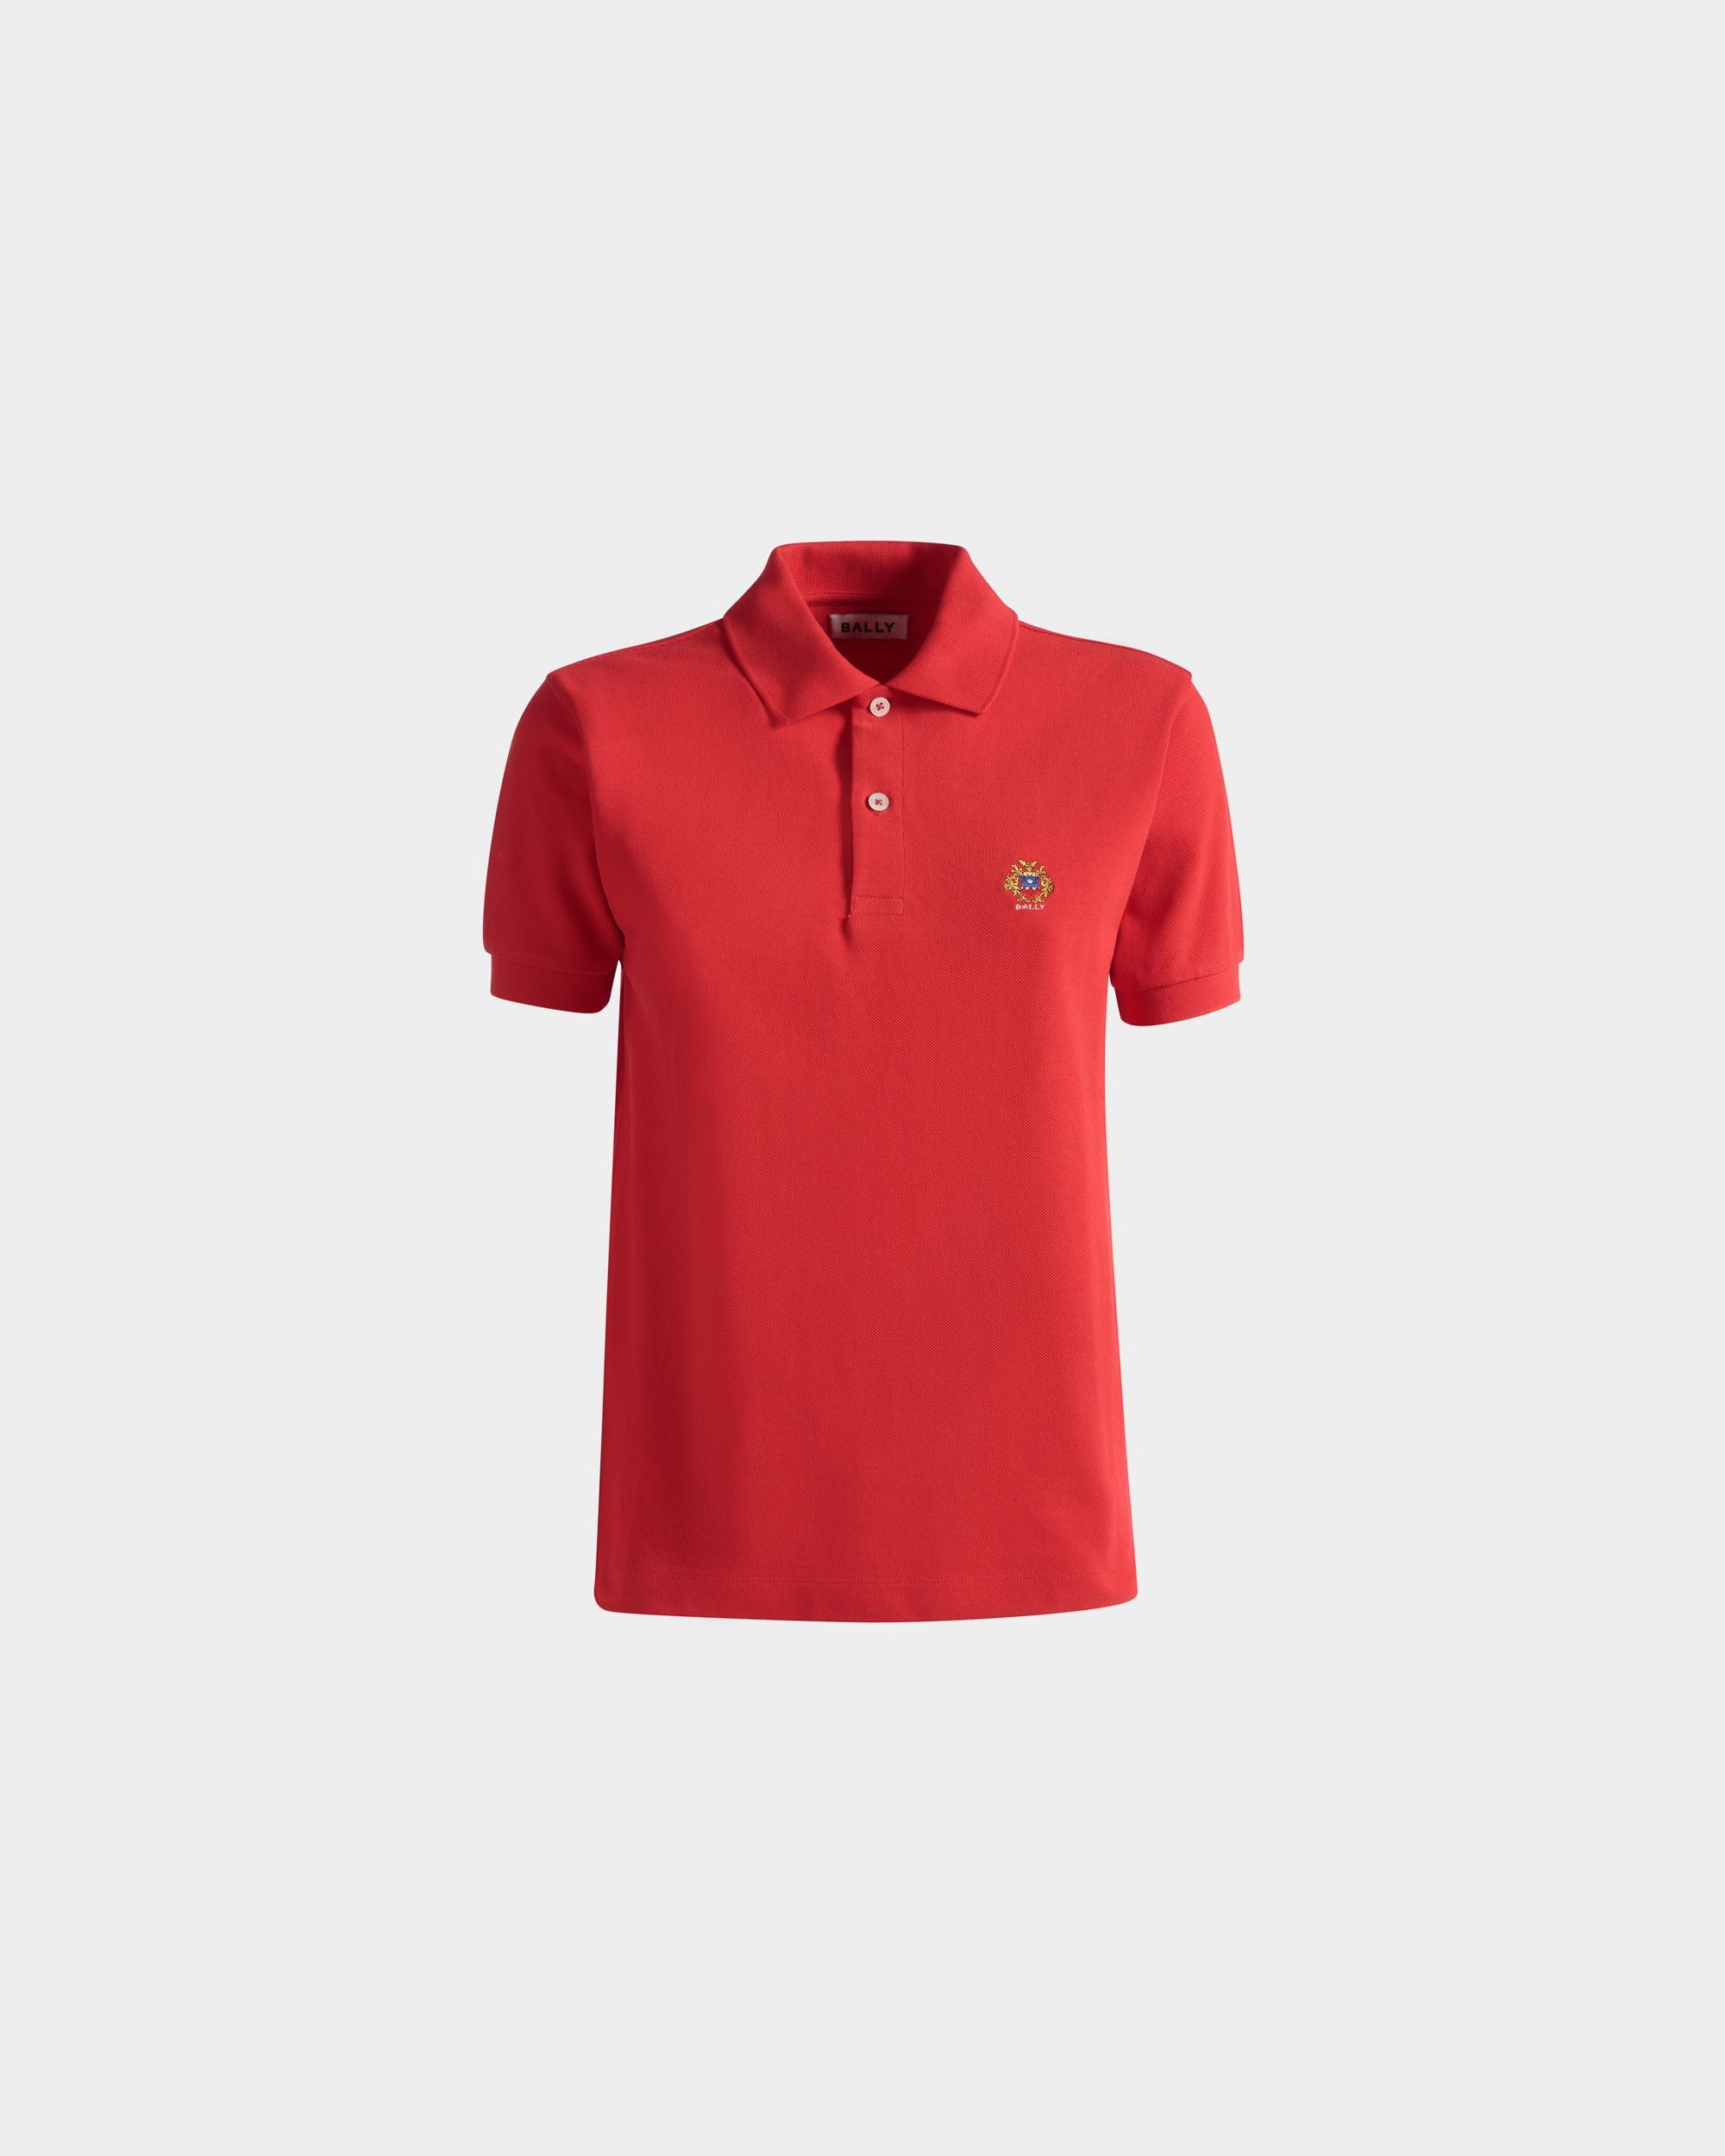 Women's Short Sleeve Polo in Red Cotton | Bally | Still Life Front